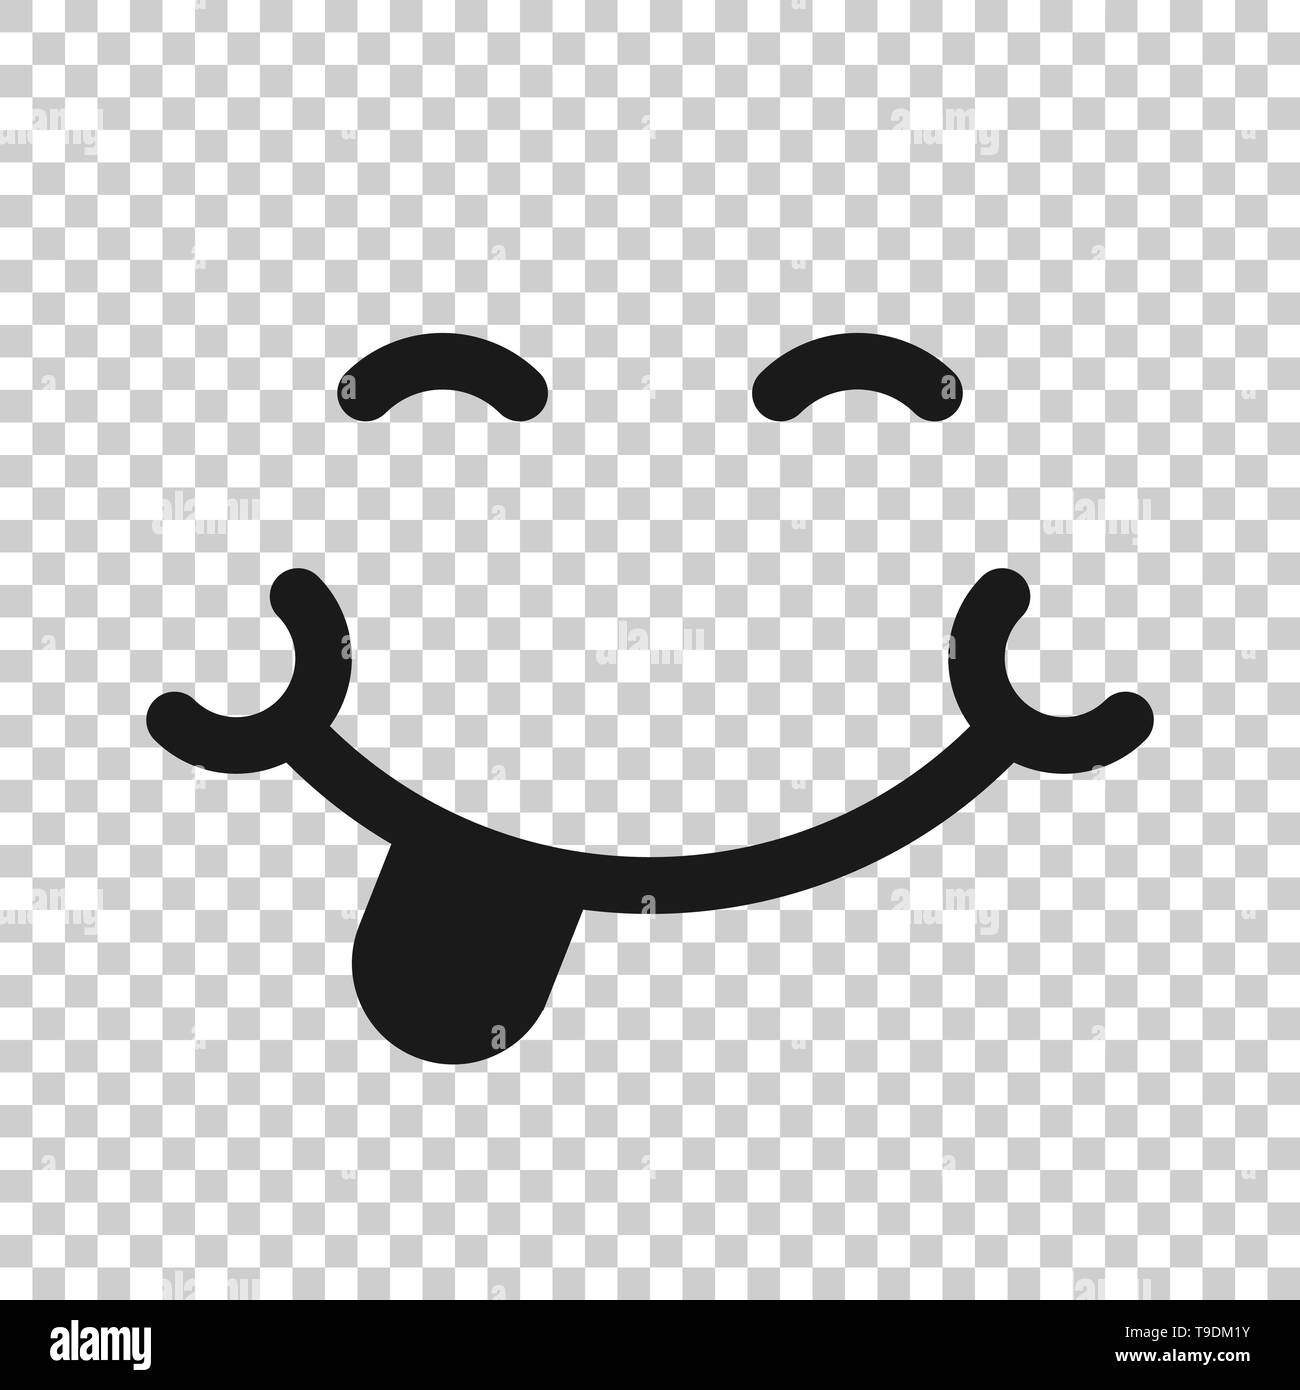 Smile face icon in transparent style. Tongue emoticon vector illustration on isolated background. Funny character business concept. Stock Vector